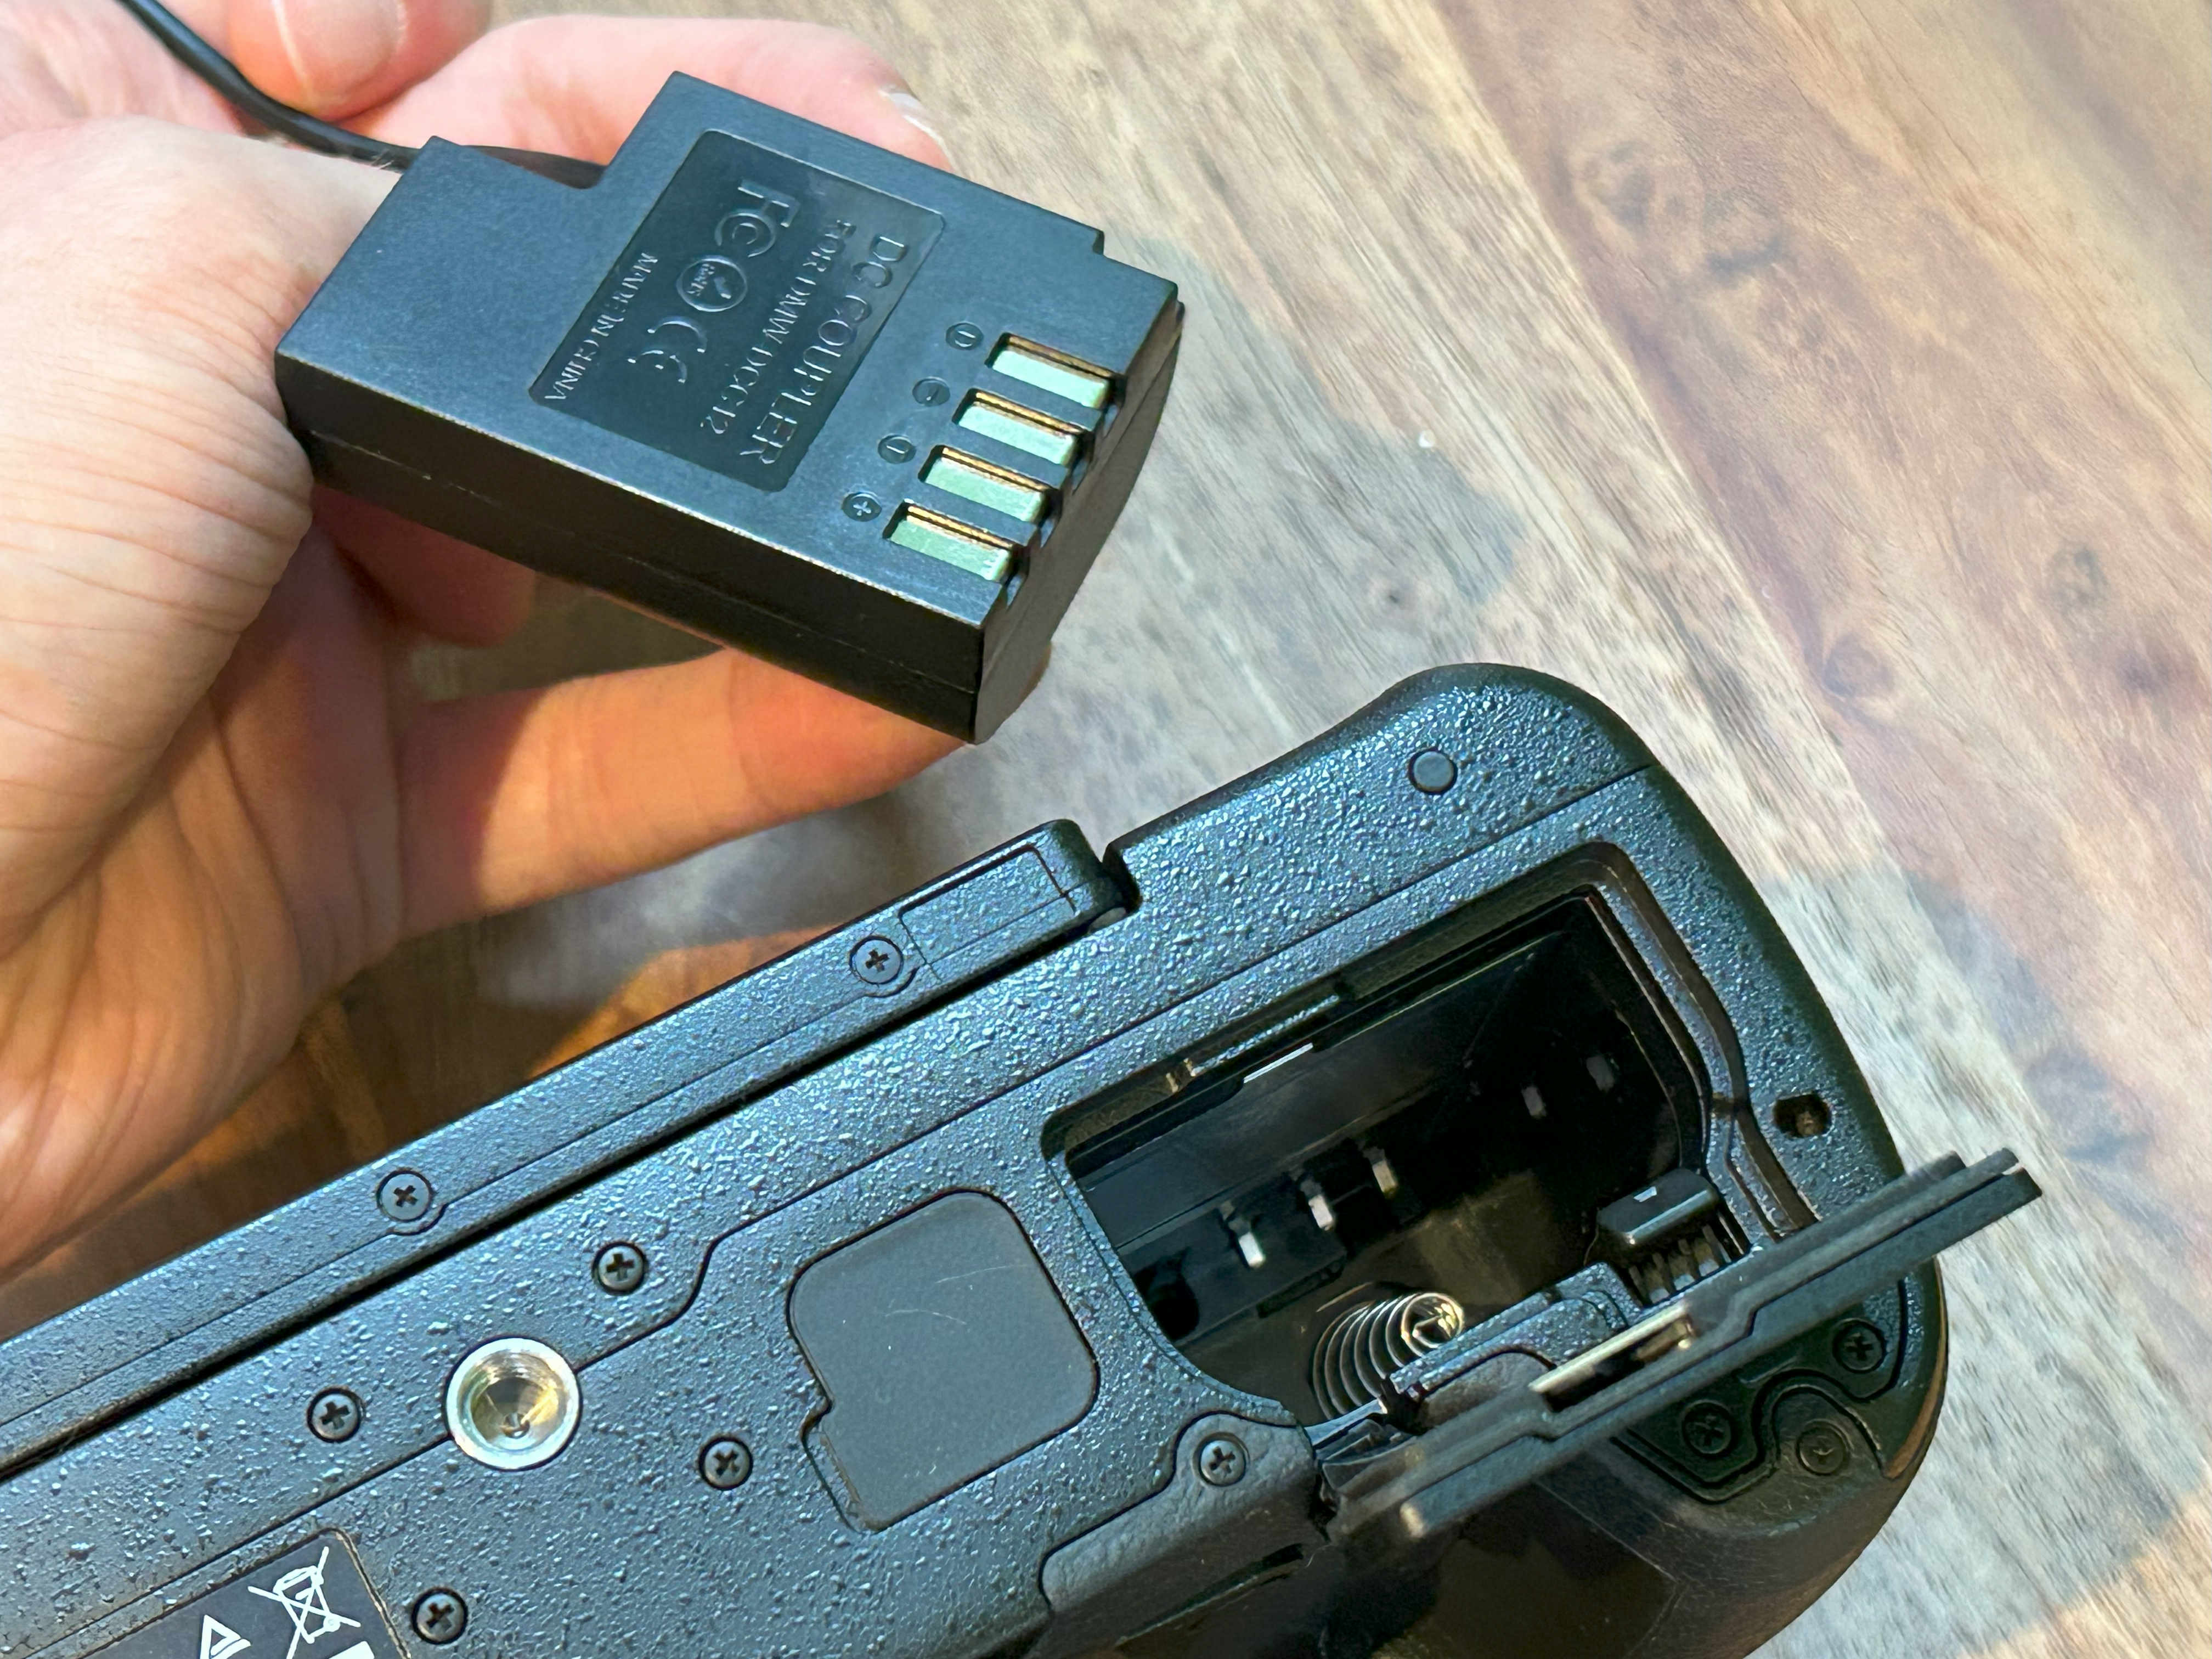 Dummy battery for my DC-GH5, and the battery slot where it goes